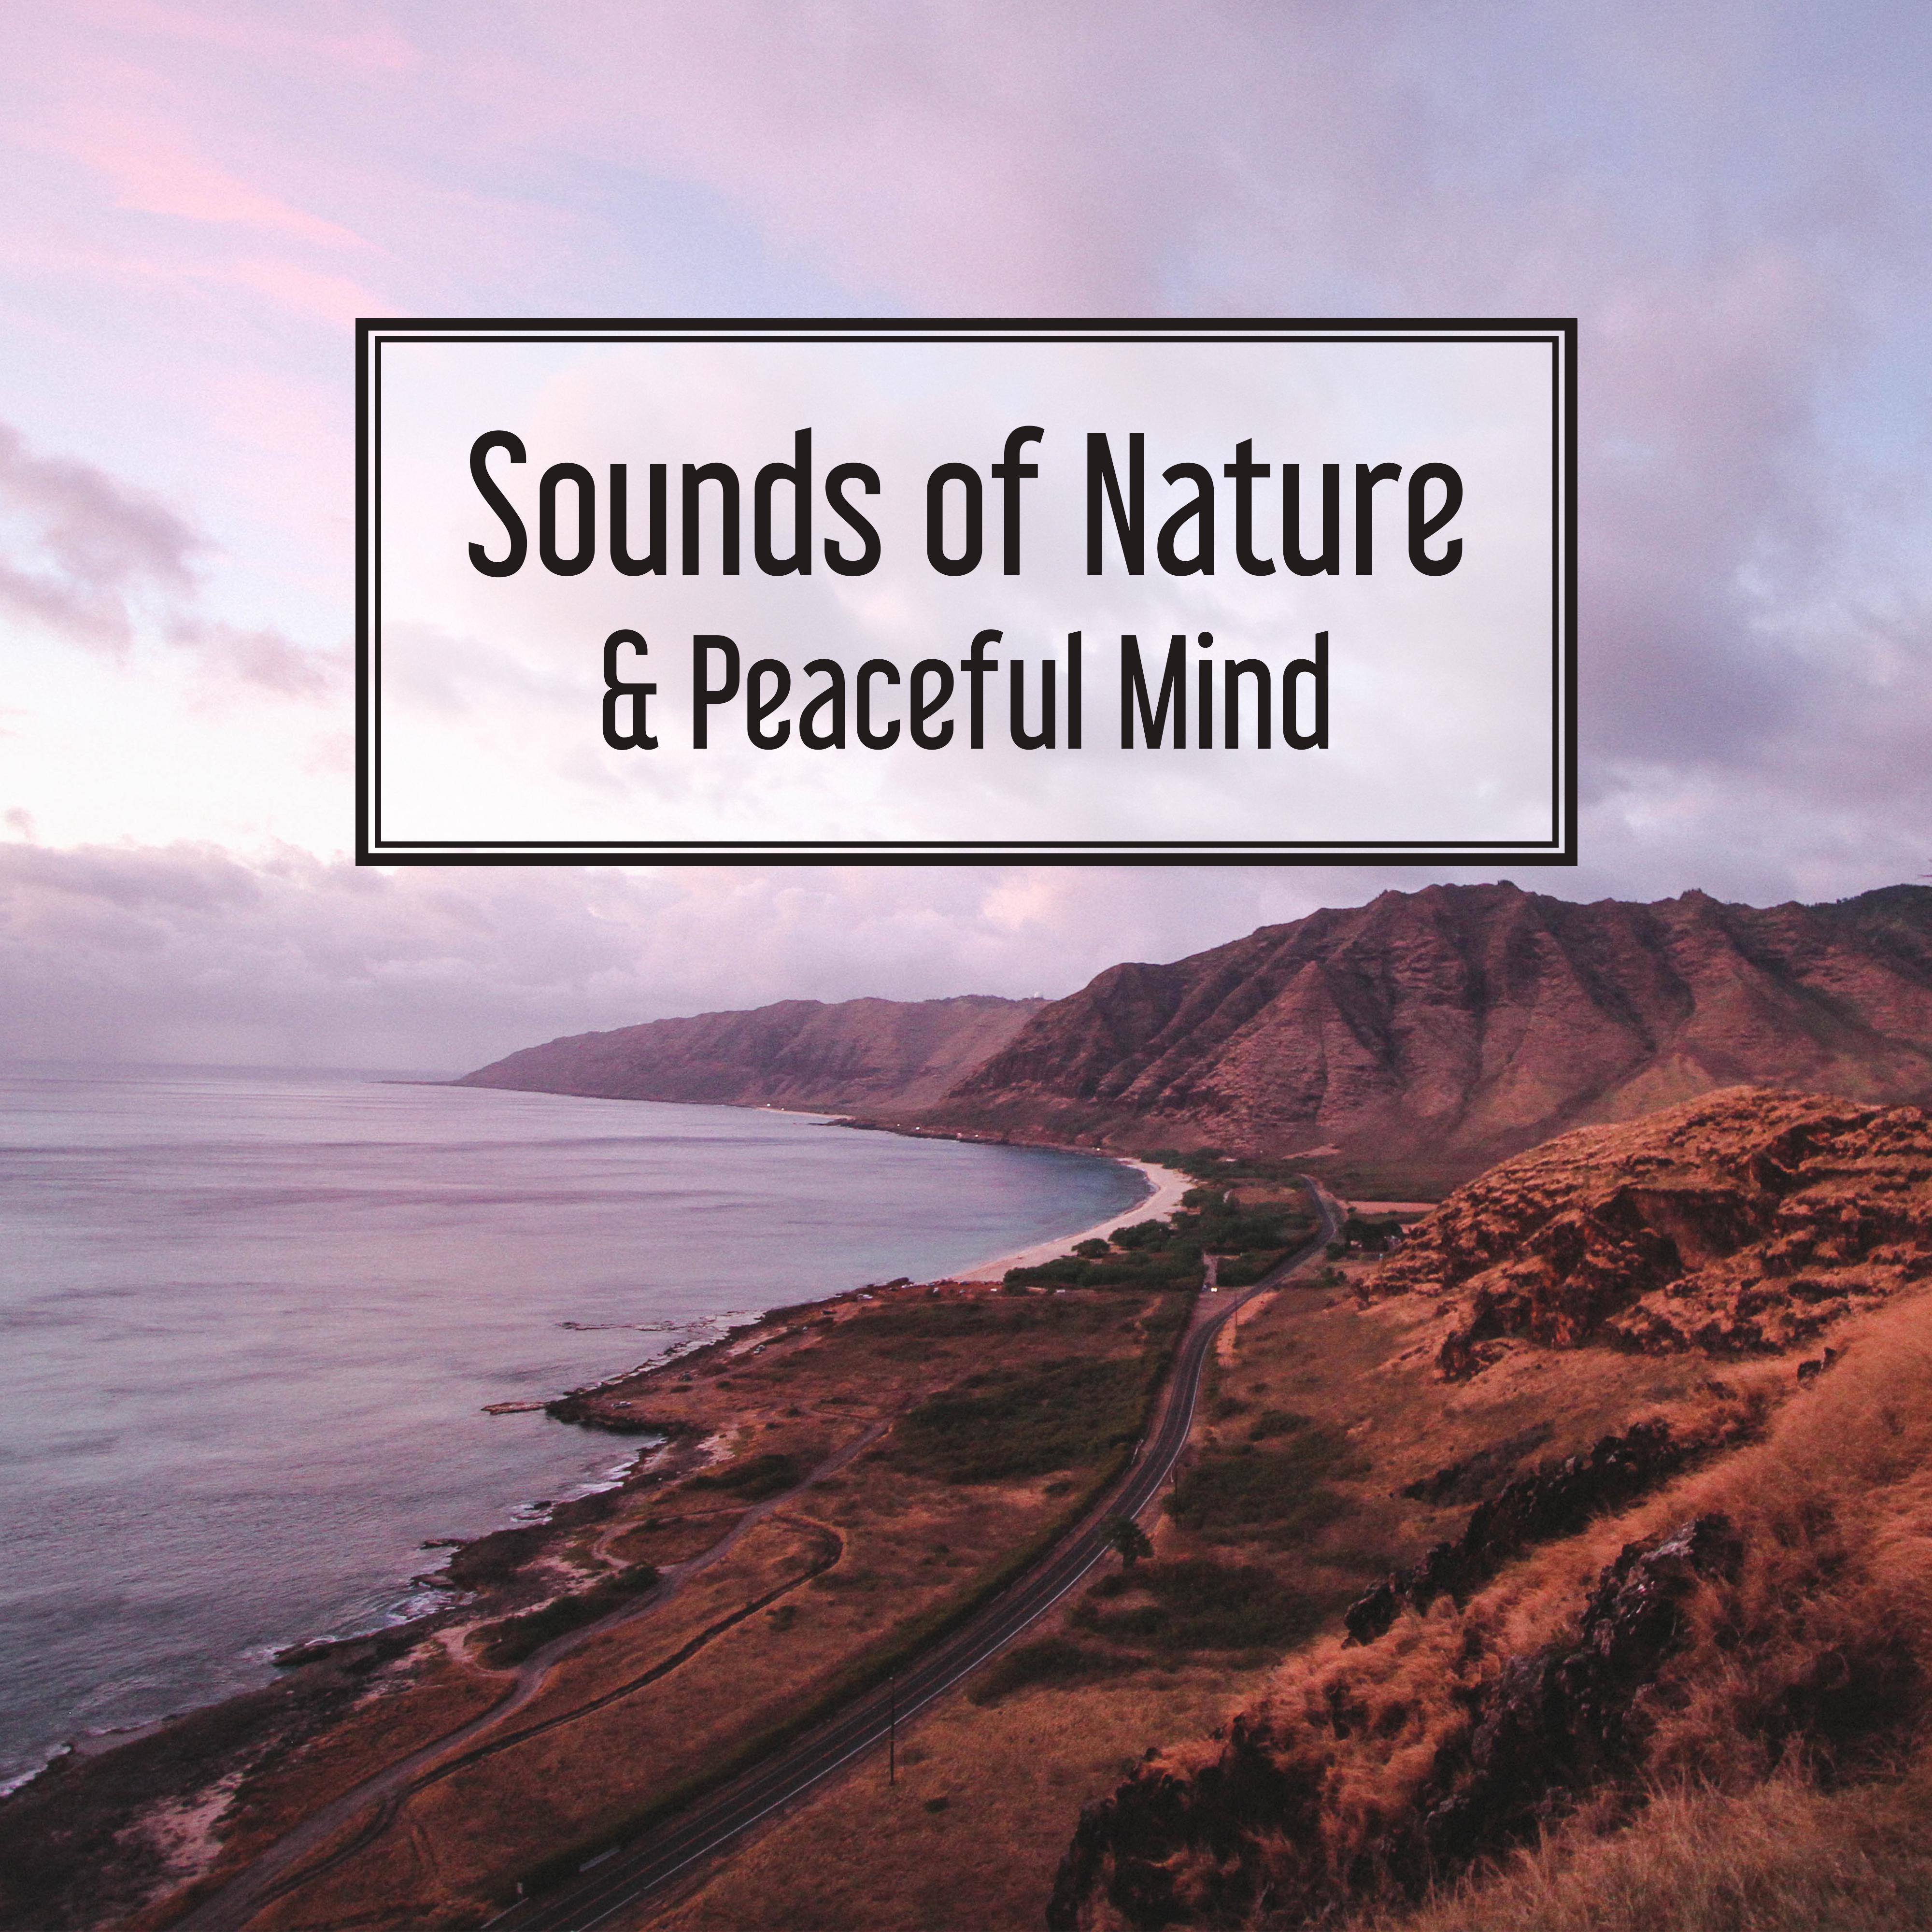 Sounds of Nature  Peaceful Mind  Soft Music to Rest, Asian Zen, Relief, Calm Down, Zen, Calming Melodies for Listening